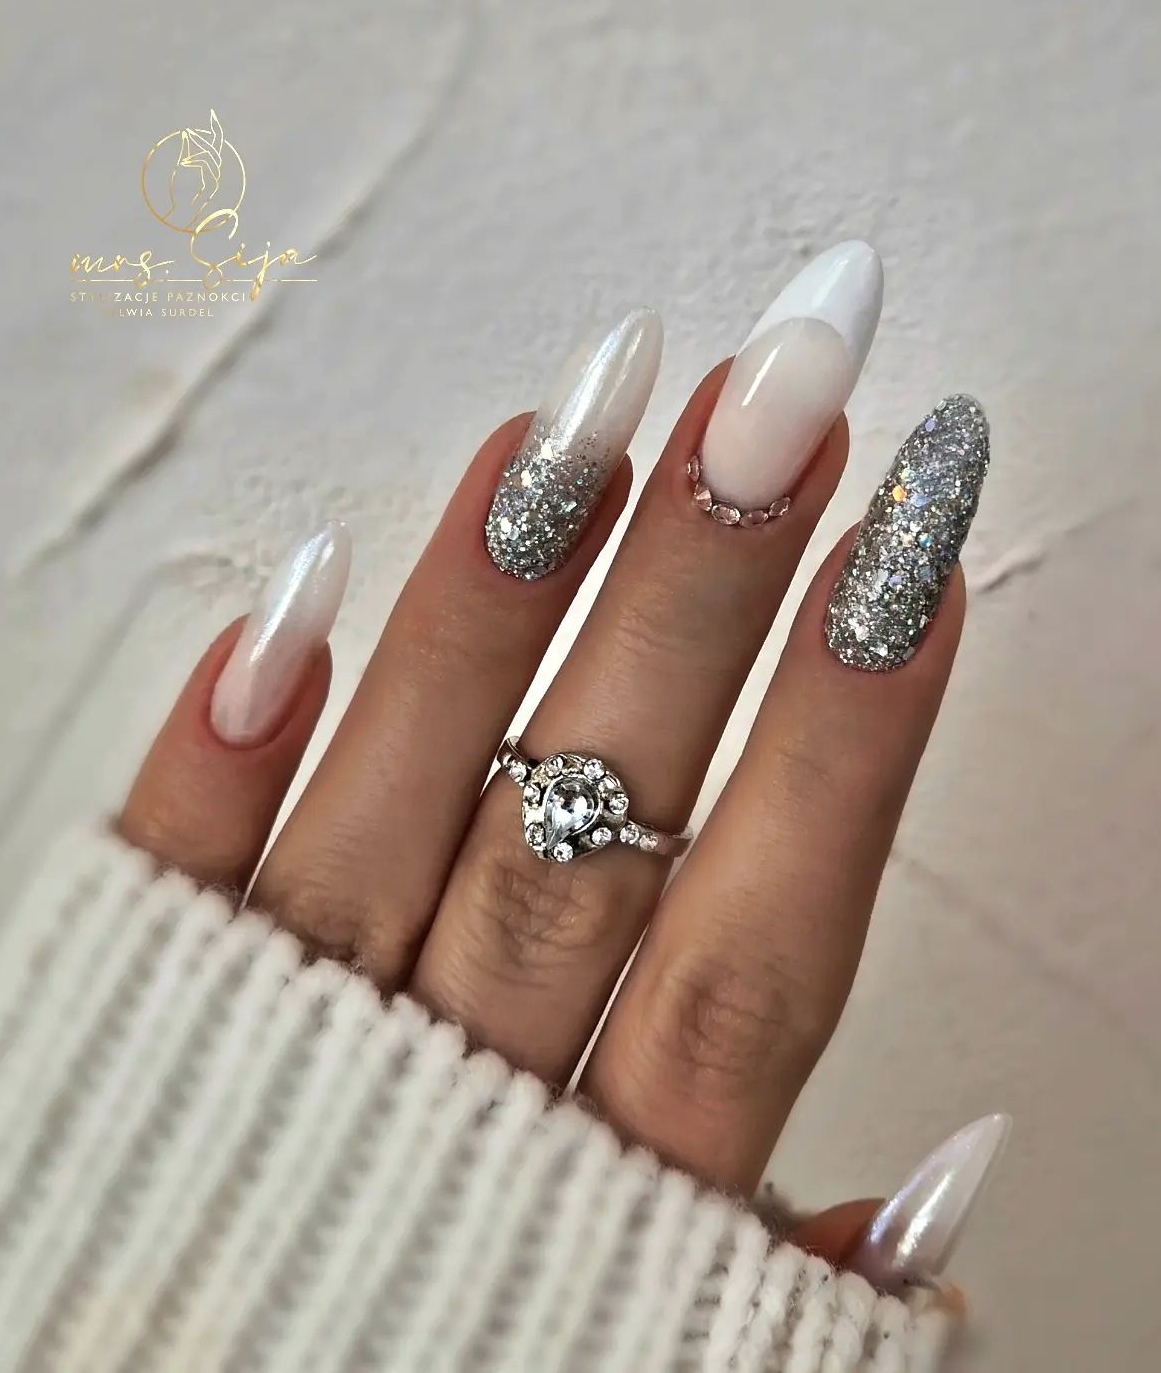 Long Round Nails with Silver Glitter Design